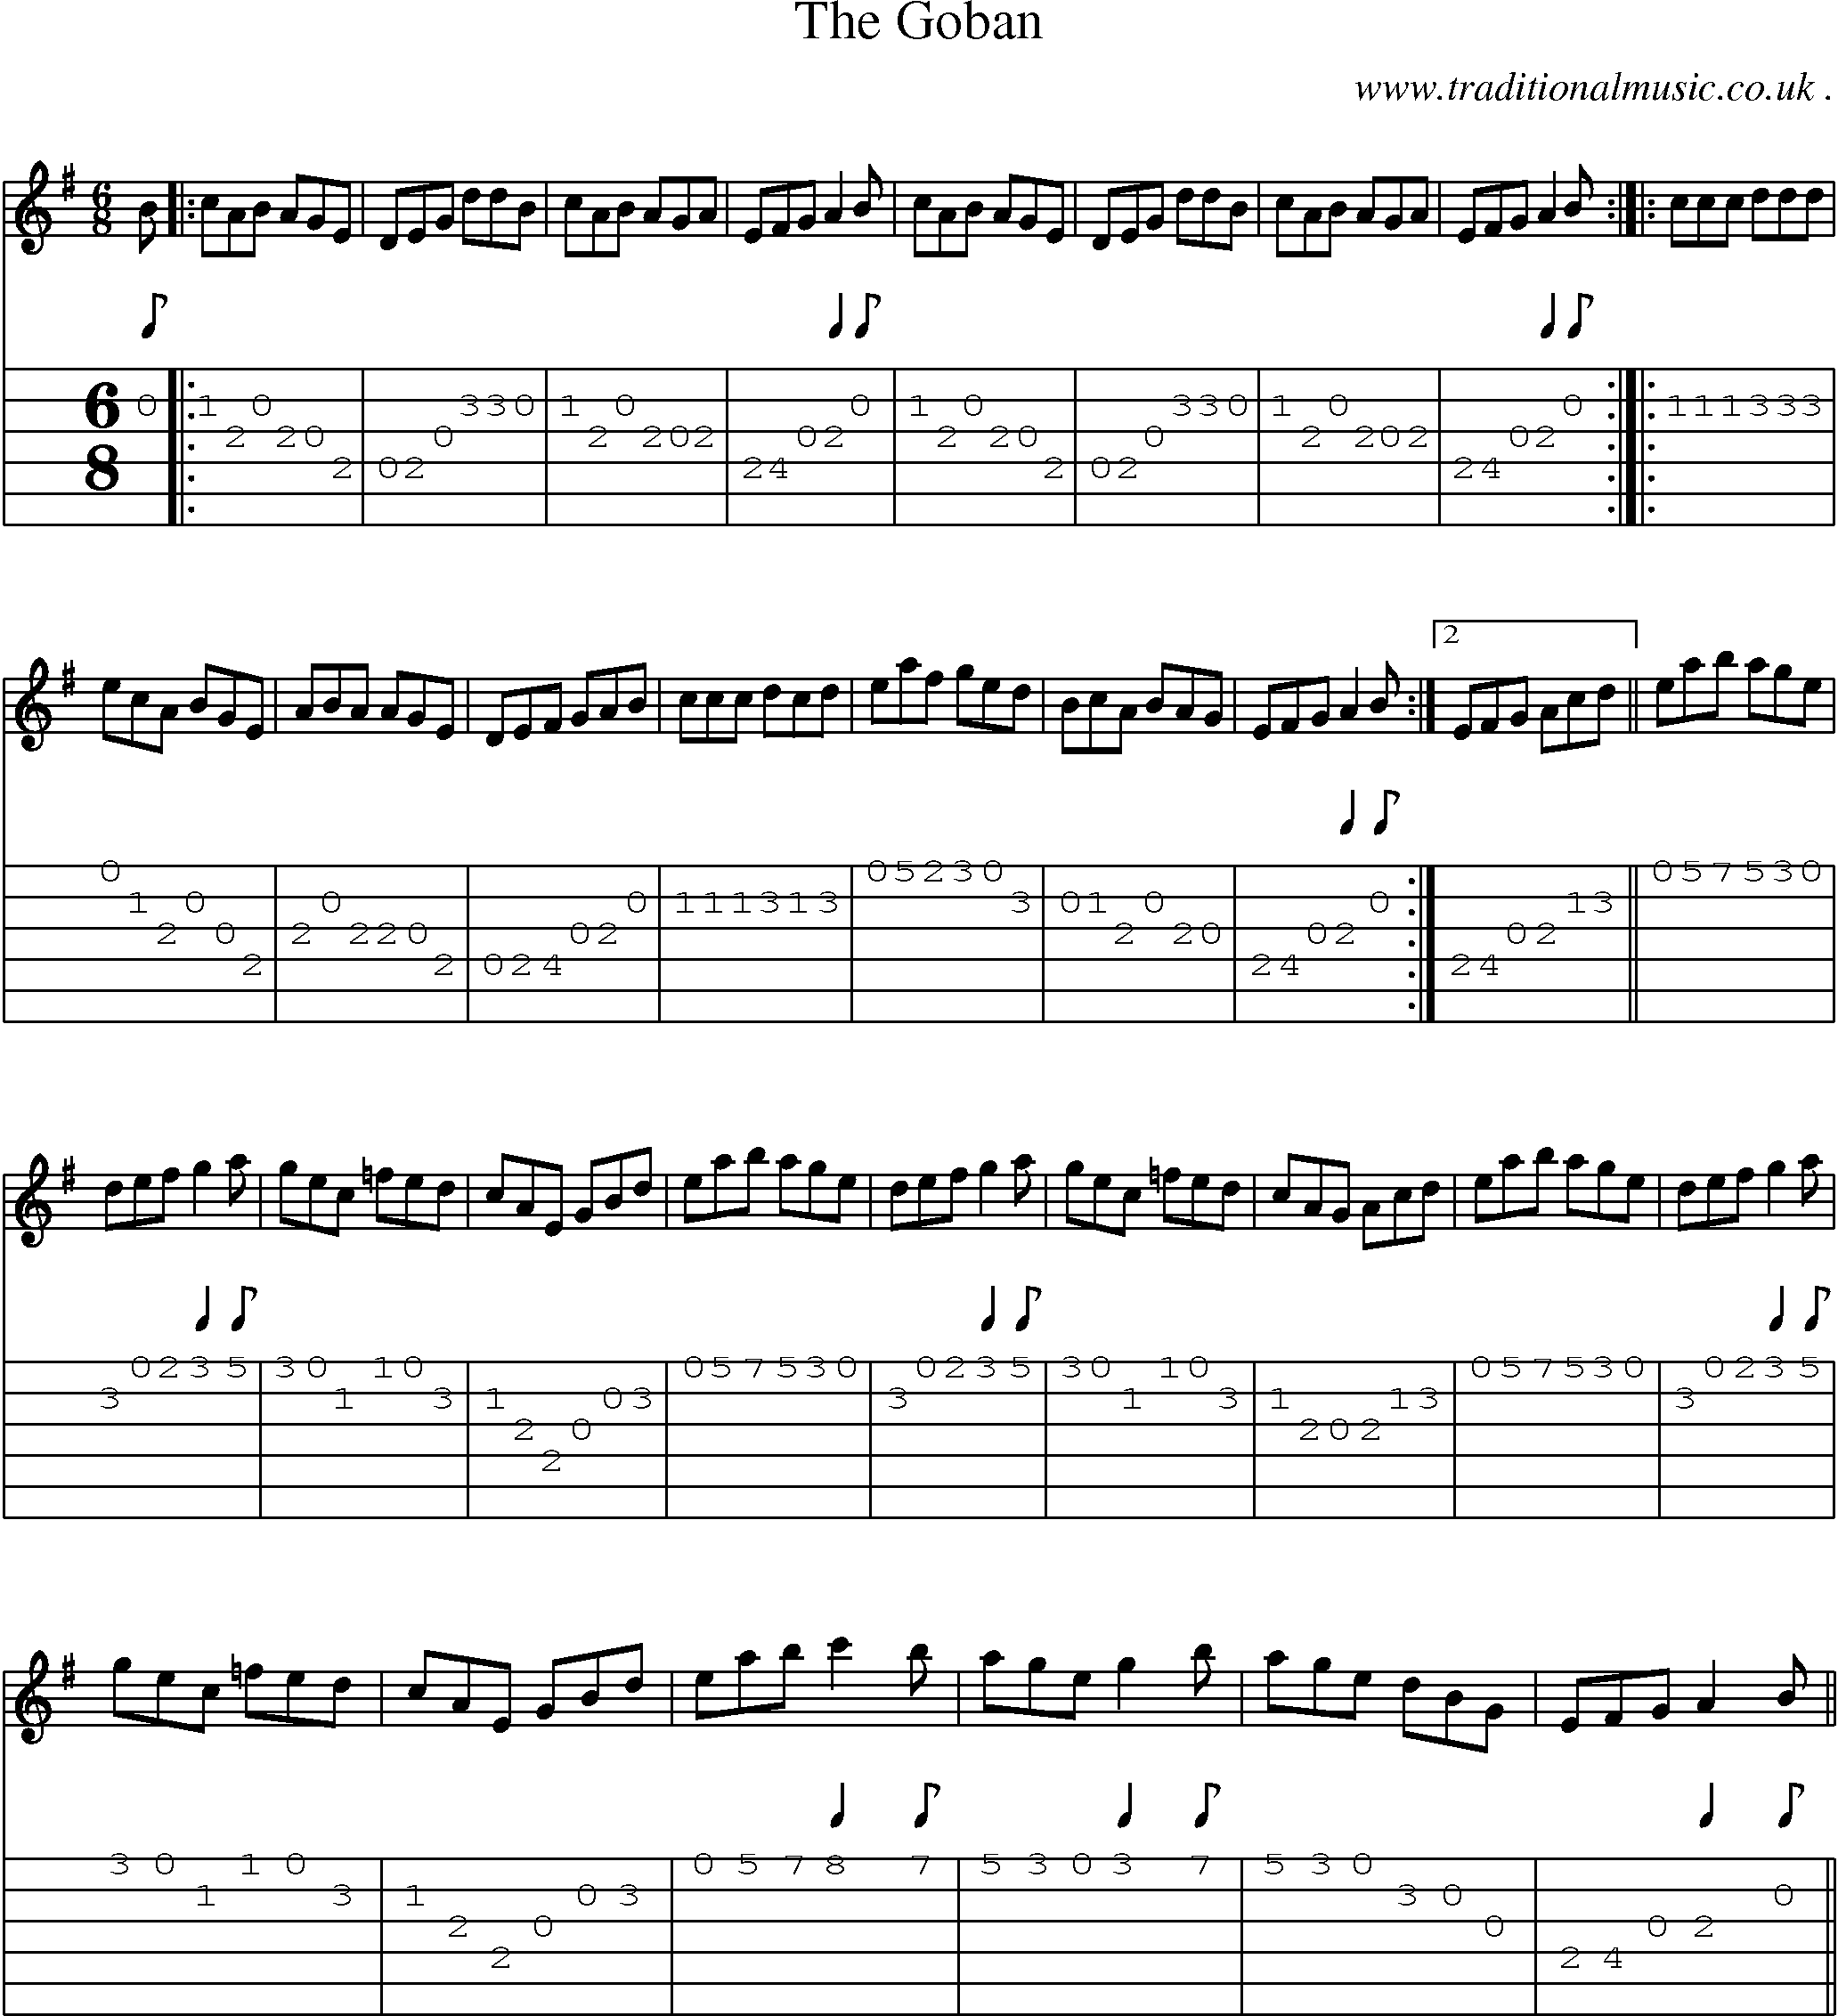 Sheet-Music and Guitar Tabs for The Goban